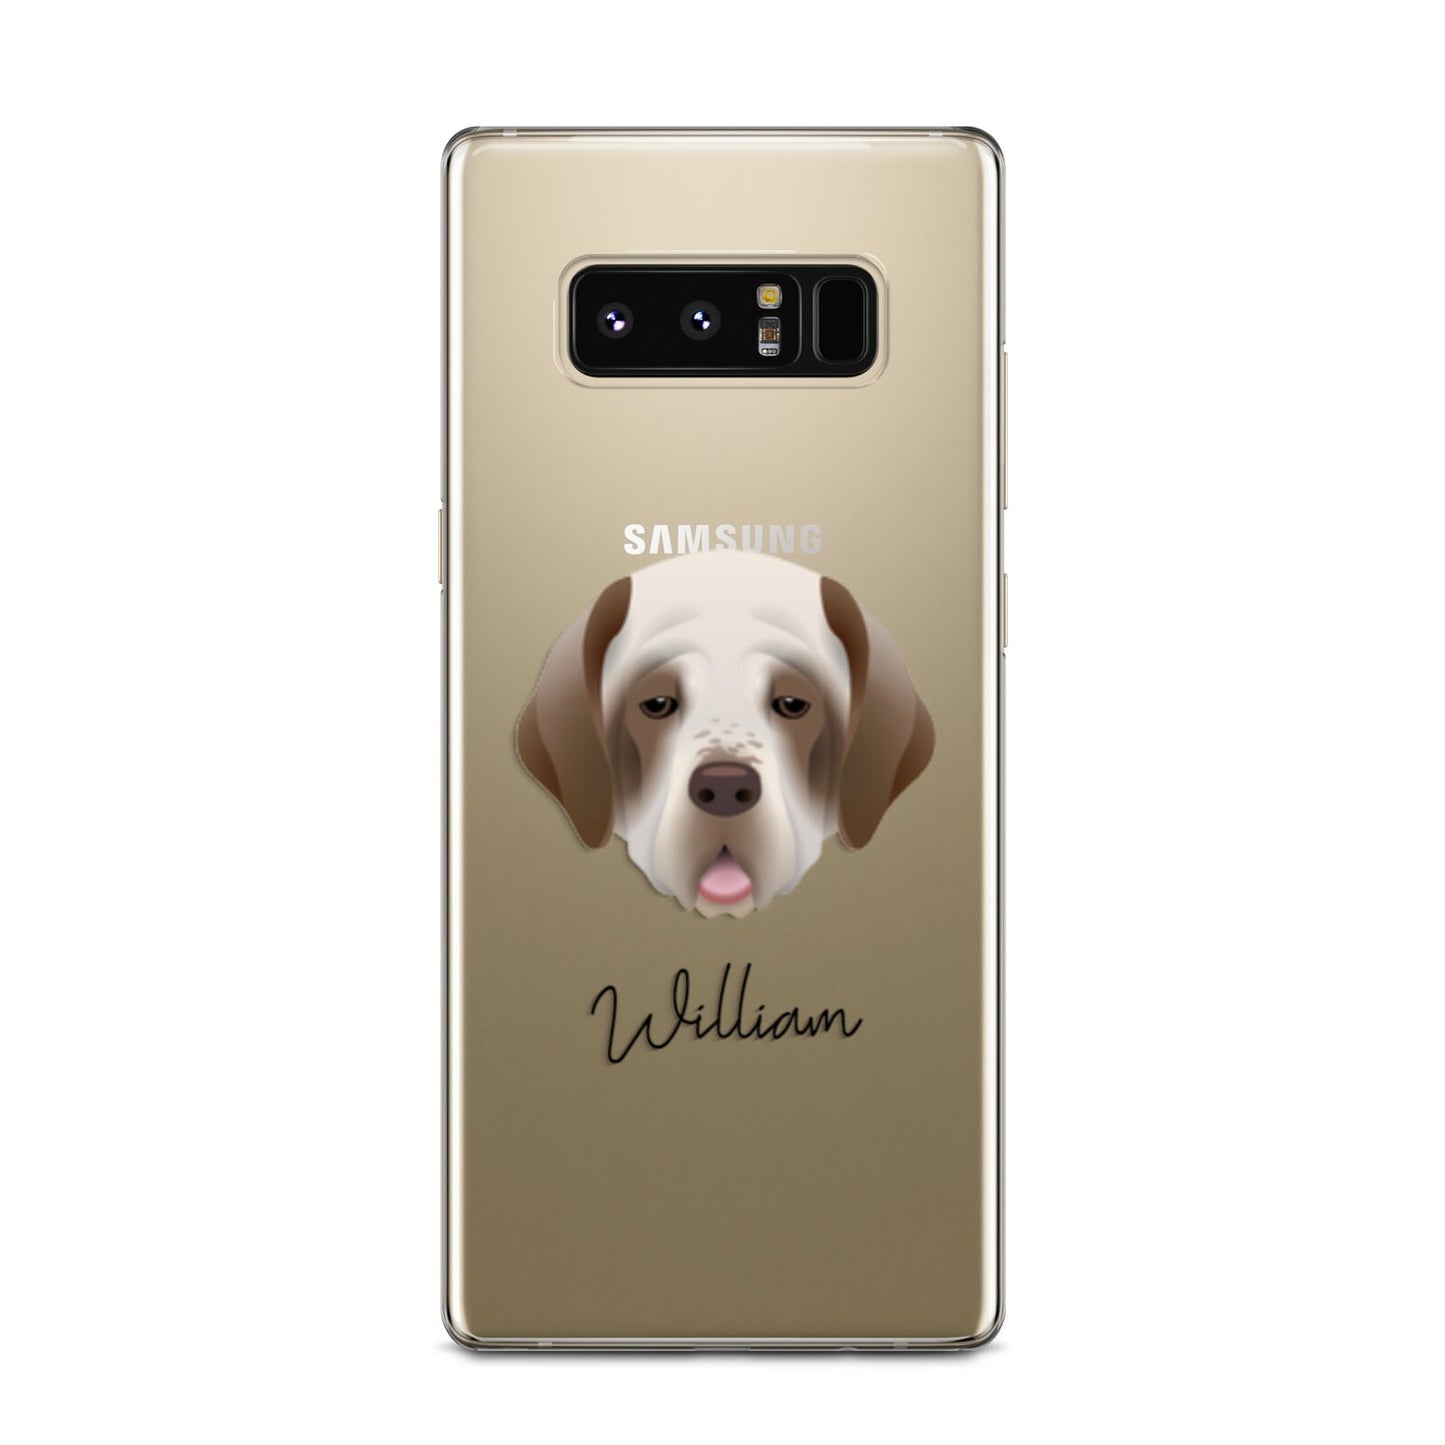 Clumber Spaniel Personalised Samsung Galaxy Note 8 Case